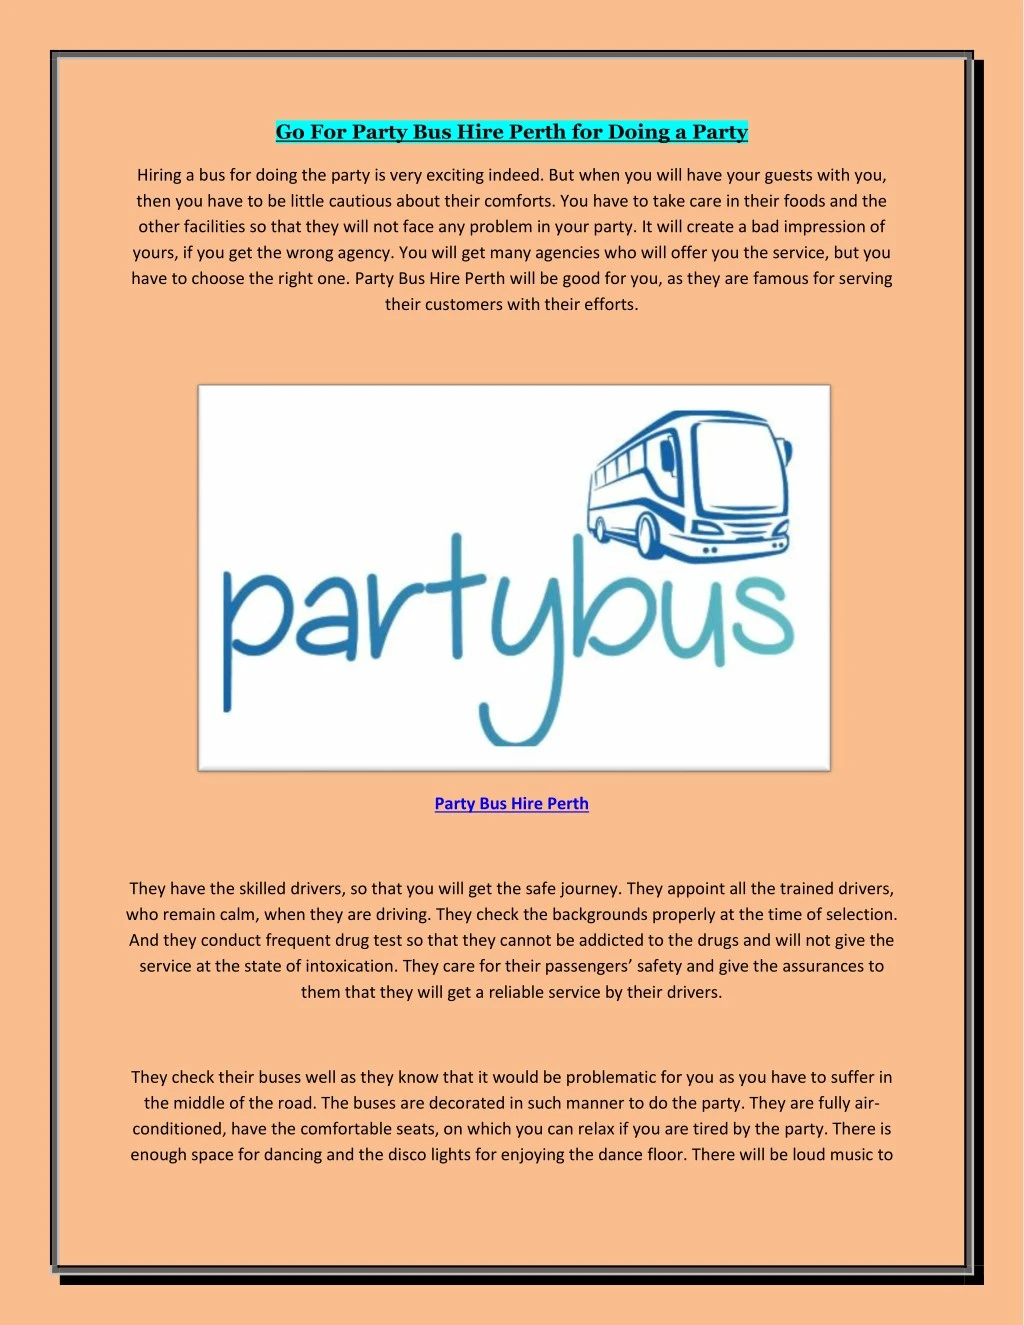 go for party bus hire perth for doing a party